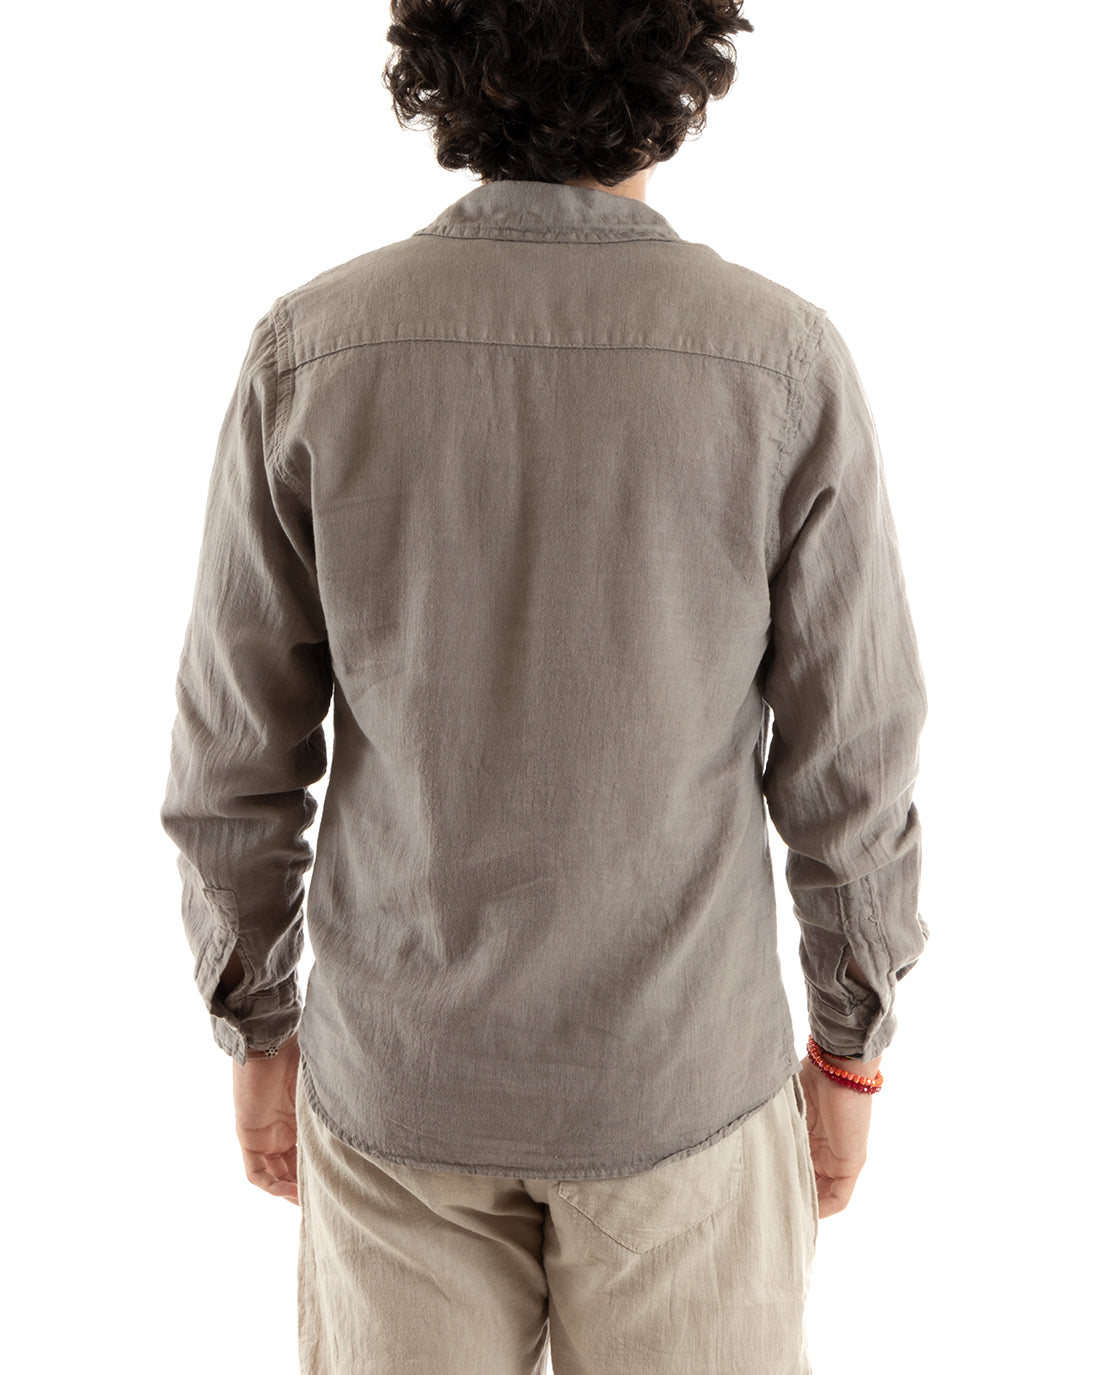 Men's Shirt With Collar Slim Fit Linen Solid Color Long Sleeves Mud GIOSAL-C2756A